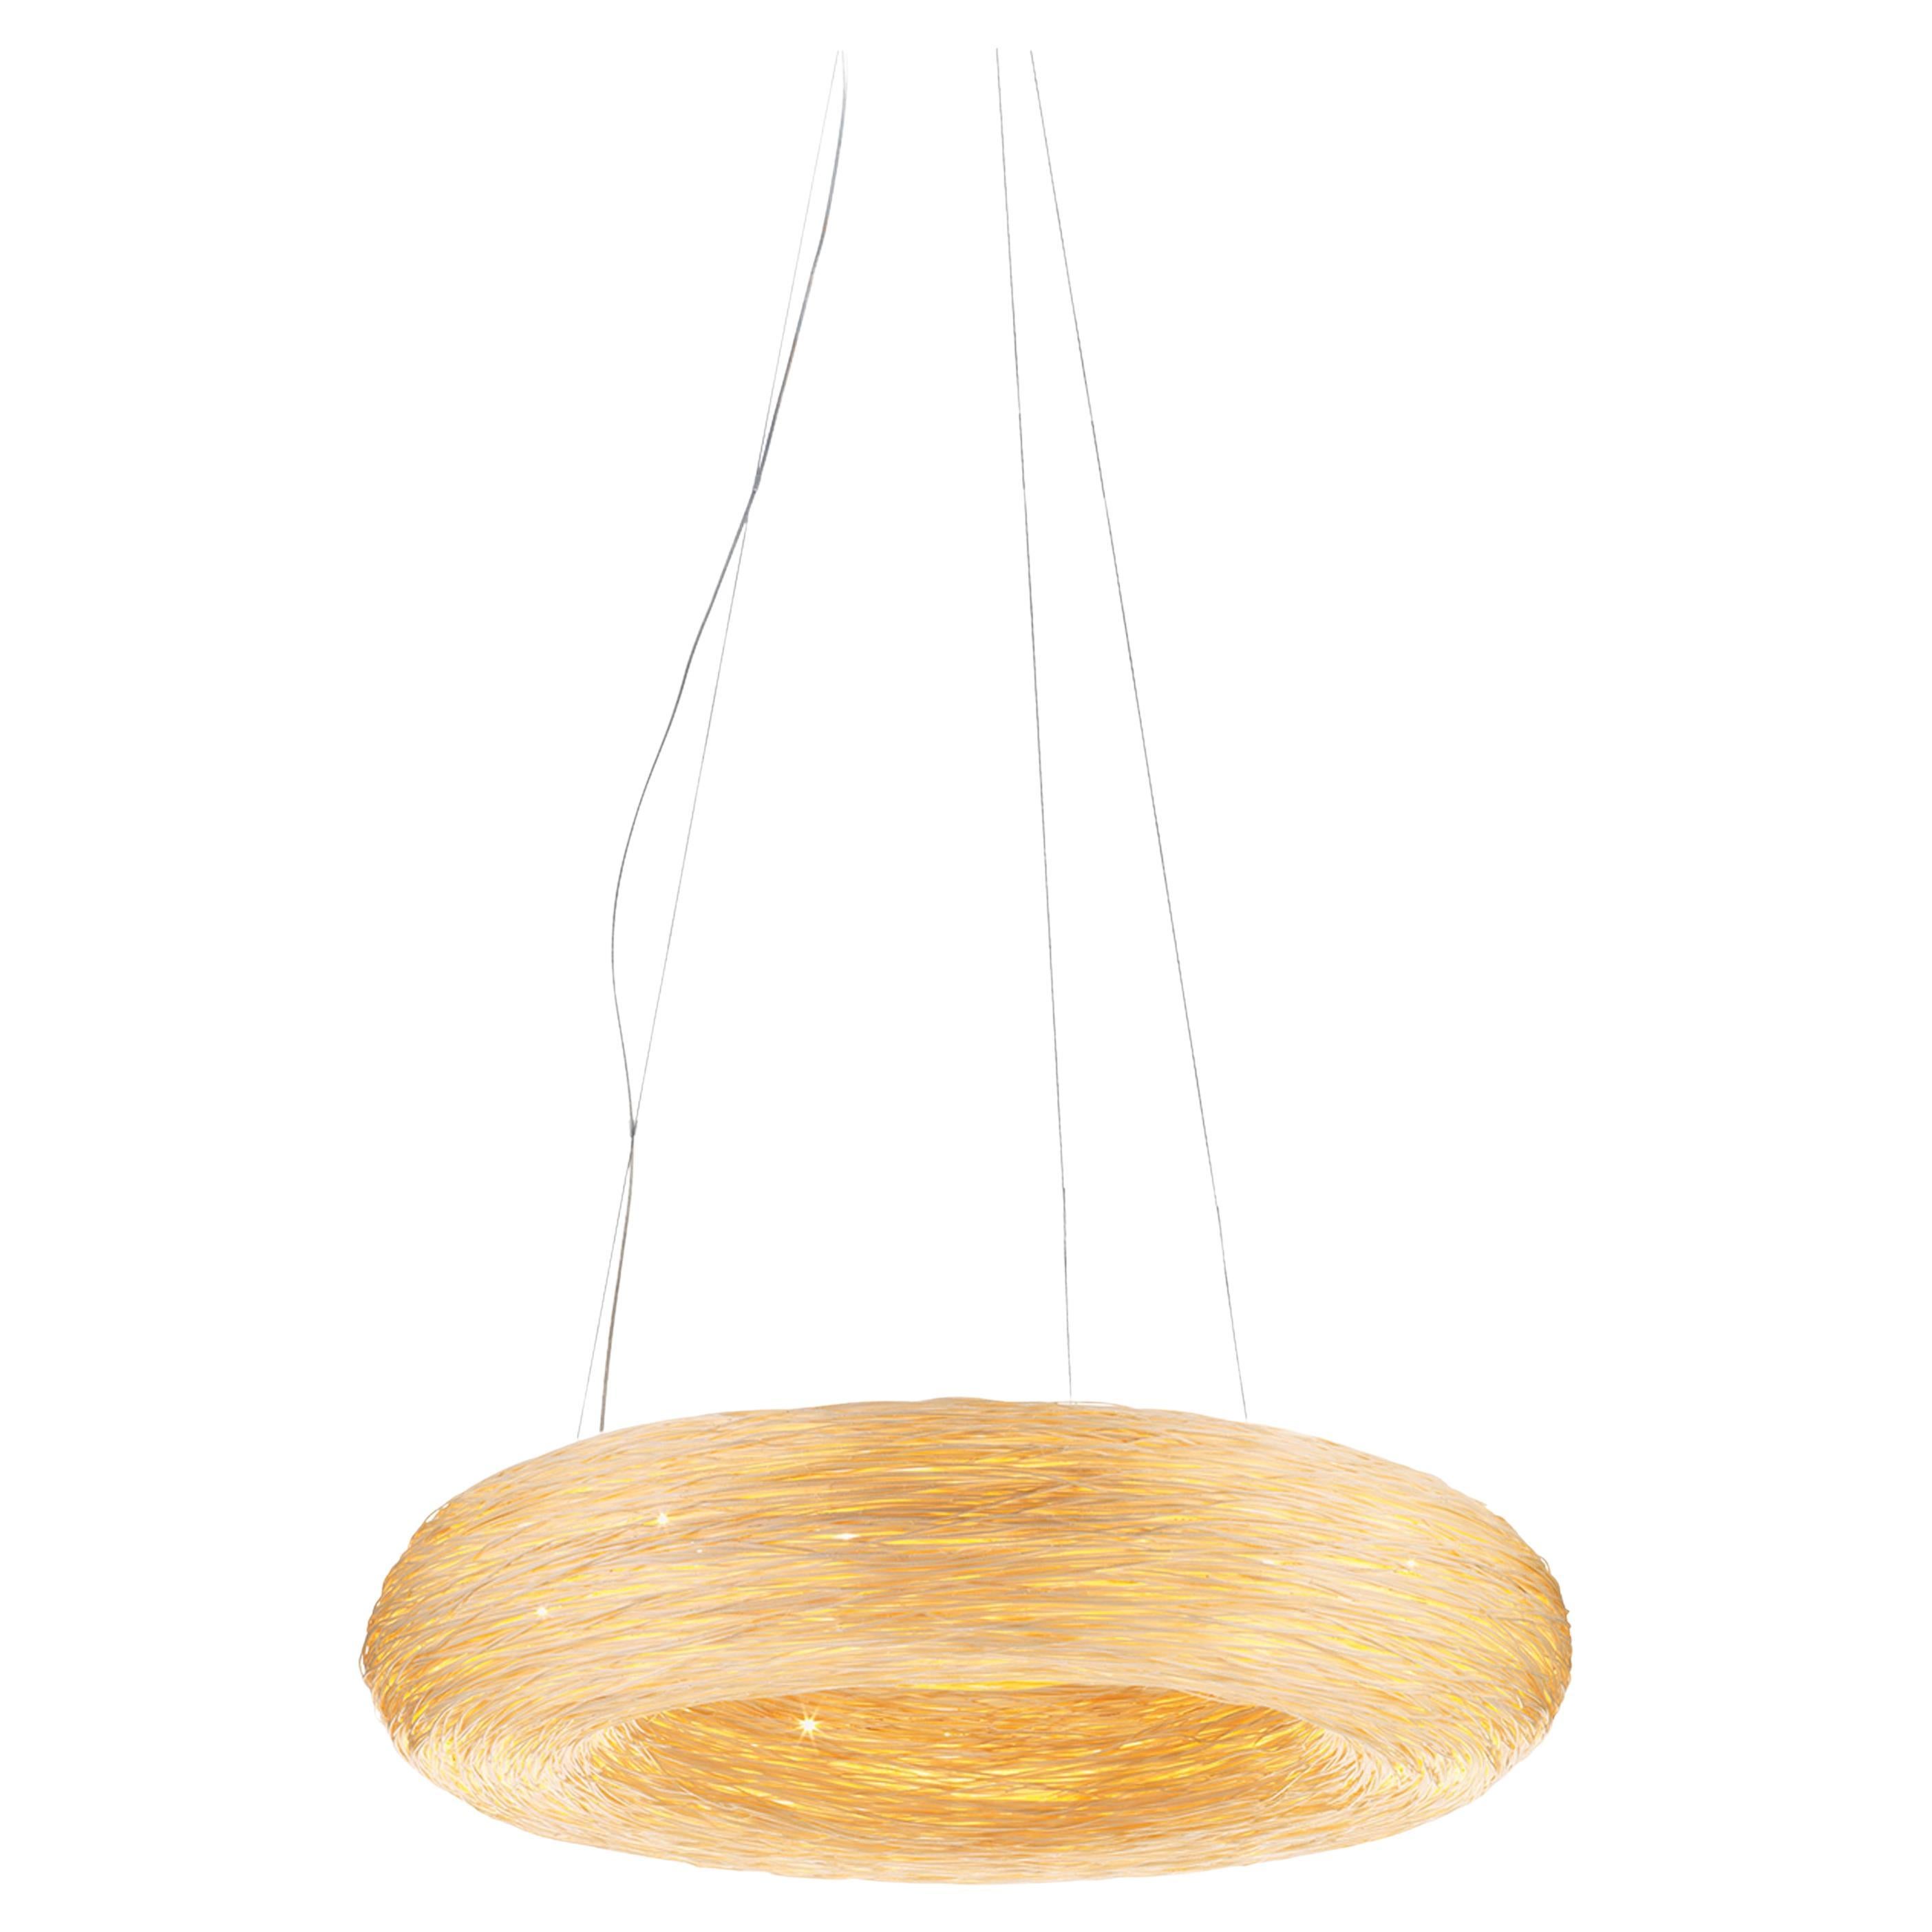 Yellow Crown by Ango, Hand-woven pendant light in a timeless circular form